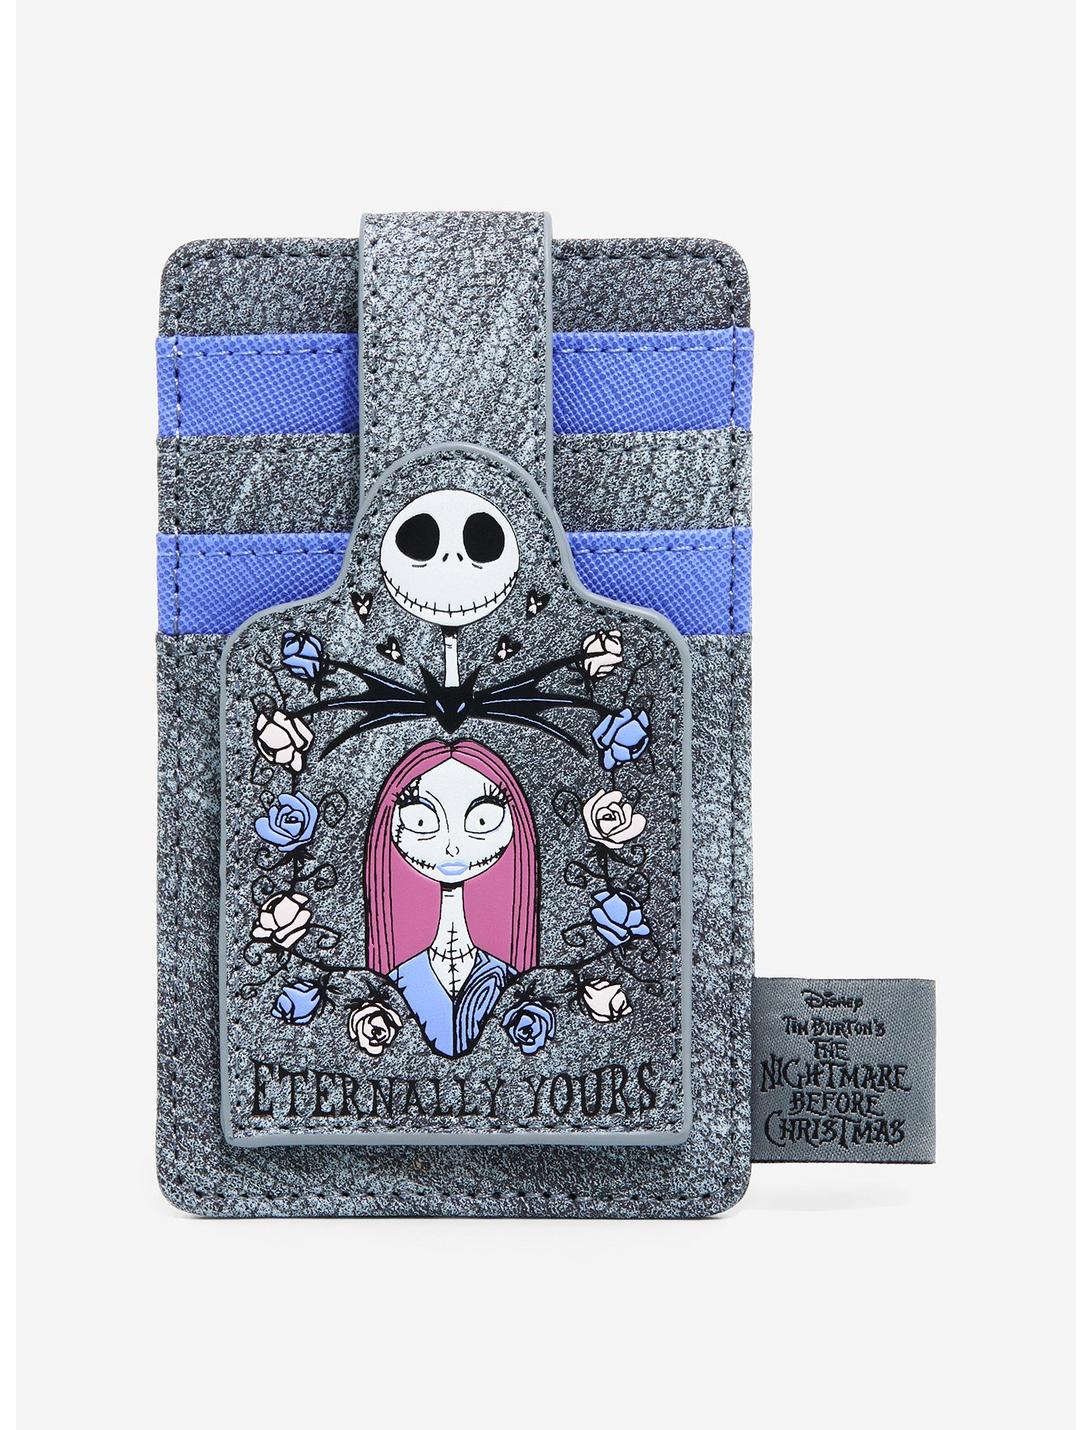 Loungefly The Nightmare Before Christmas Eternally Yours Cardholder, , hi-res